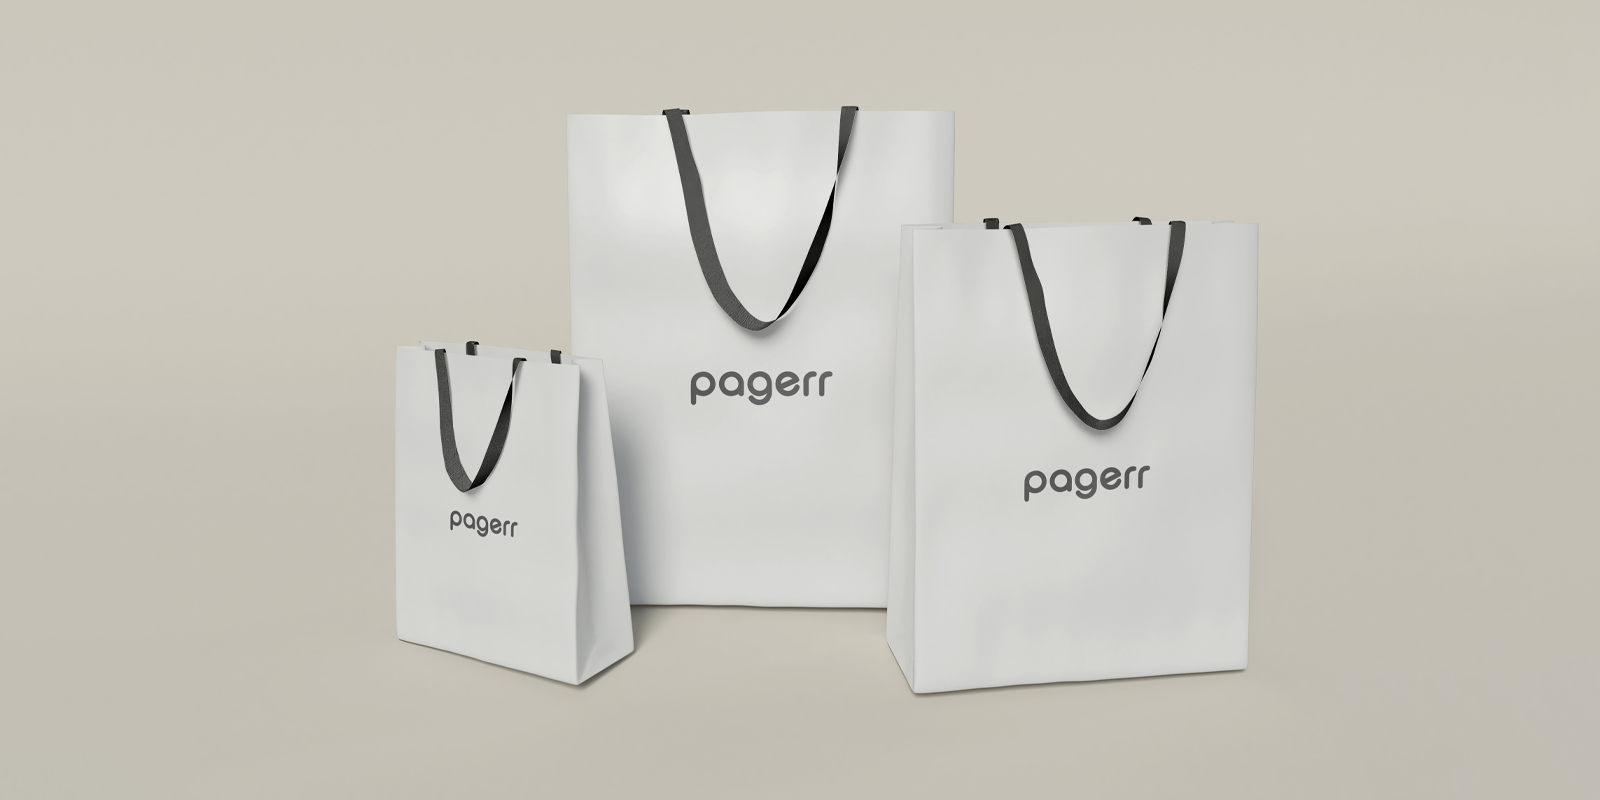 Shopping bags in Barcelona - Print with Pagerr